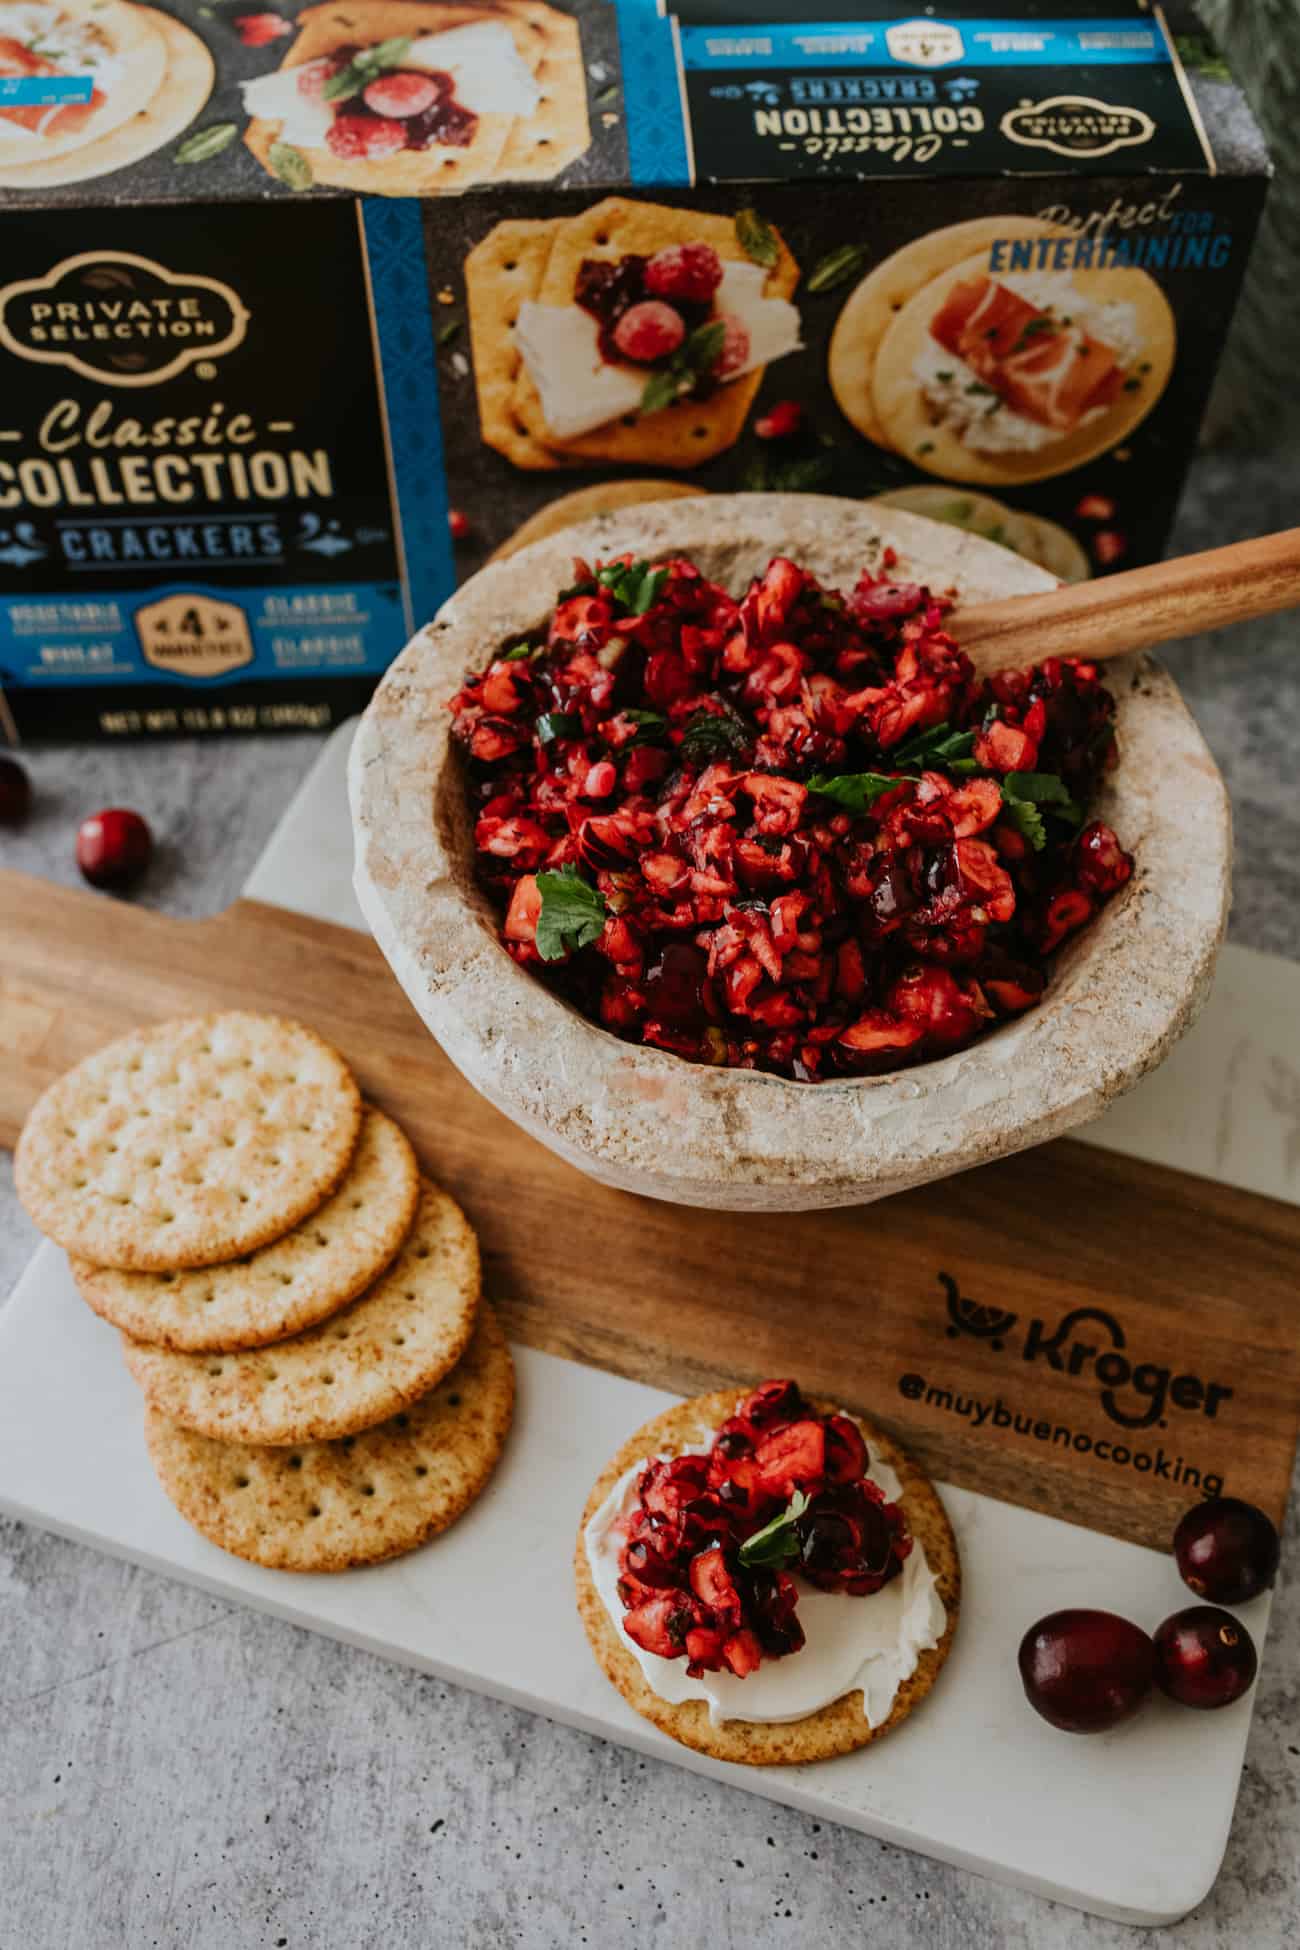 kroger branded cheese board with a bowl of cranberry jalapeño relish, a cracker smeared with cream cheese and cranberry dip, and a handful of crackers on the side.